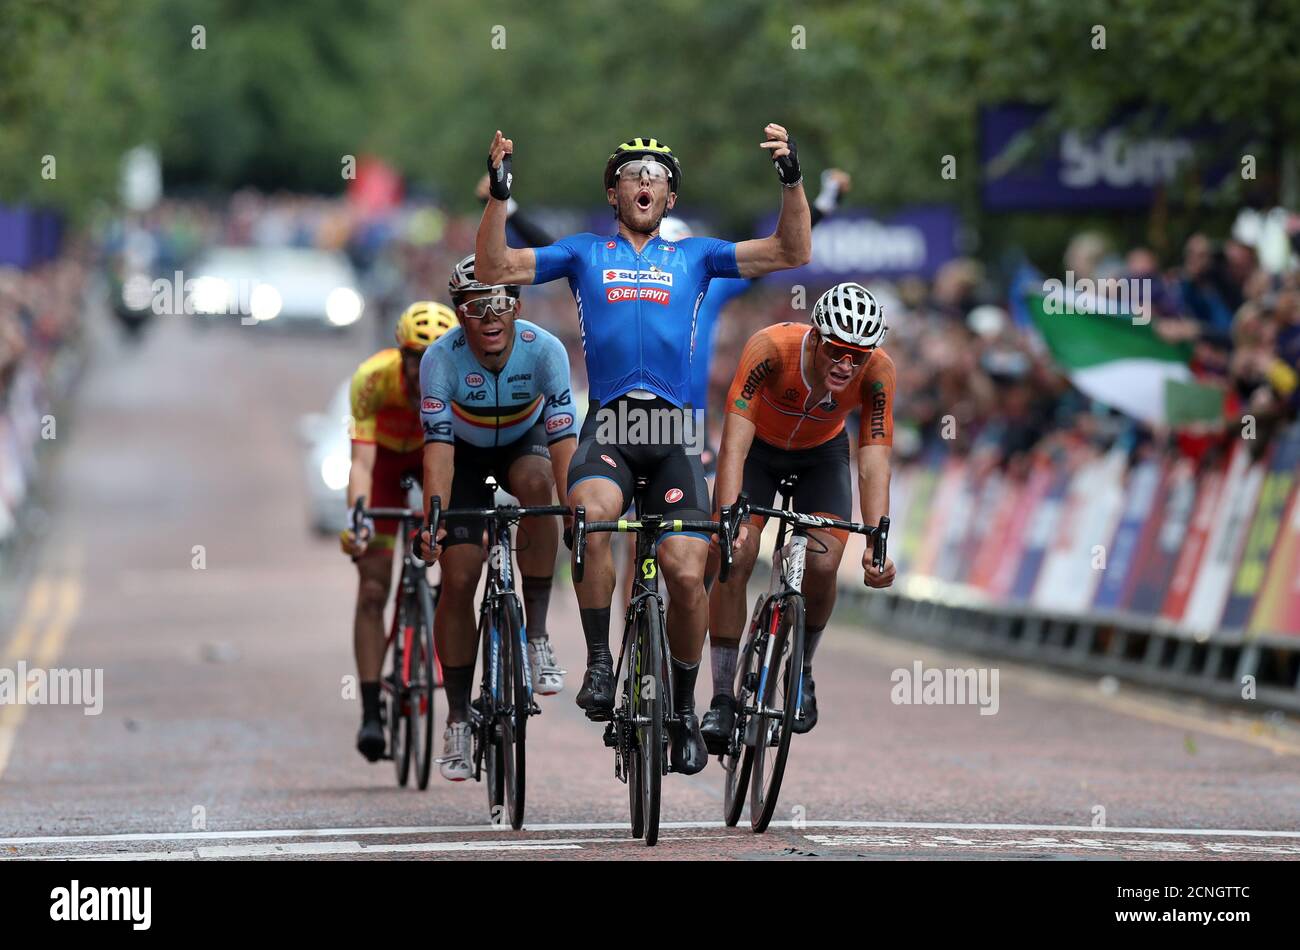 2018 European Championships - Road Cycling, Men's Road Race - Glasgow,  Britain - August 12, 2018 - Matteo Trentin of Italy wins the race ahead of  Mathieu van der Poel of the